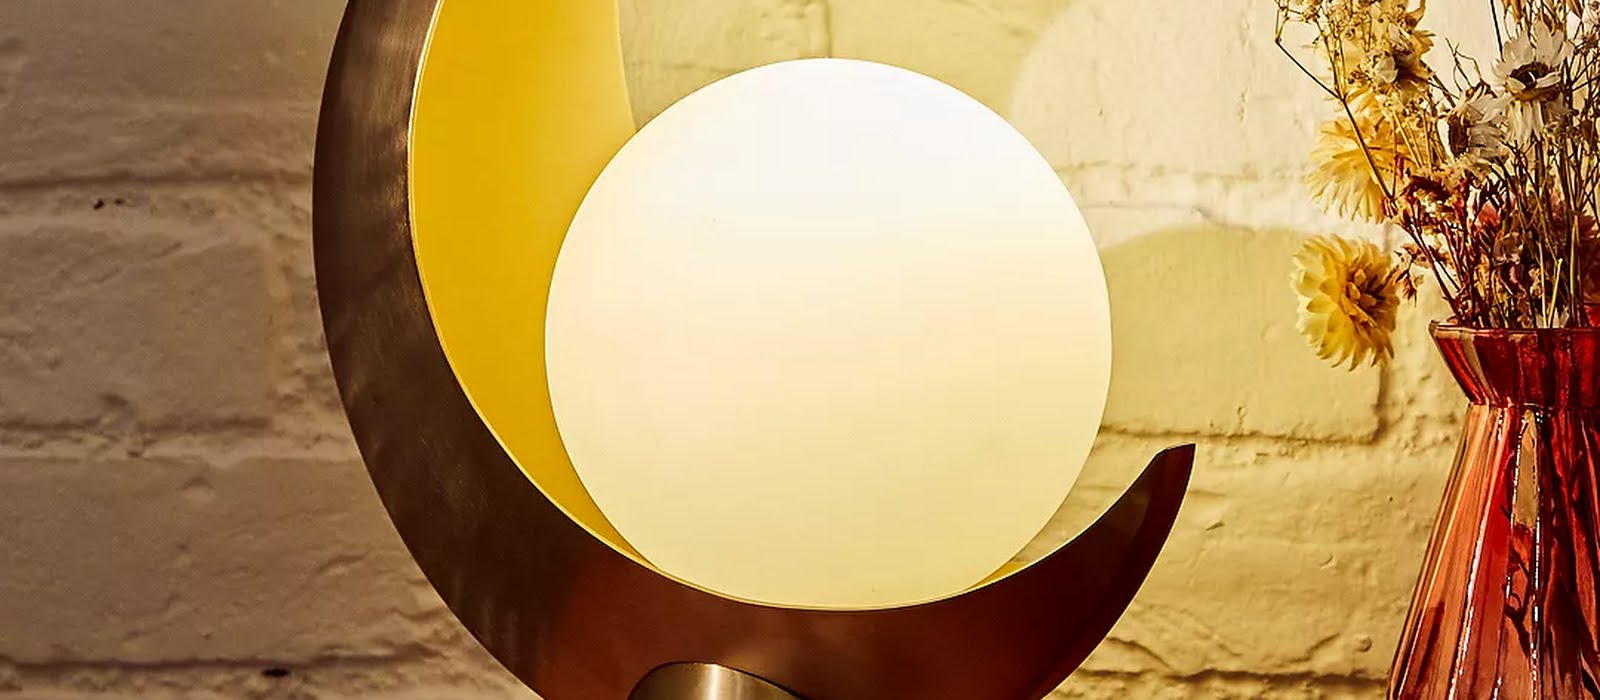 Ambient lighting: 18 lamps to add warmth and character to the corners of your home